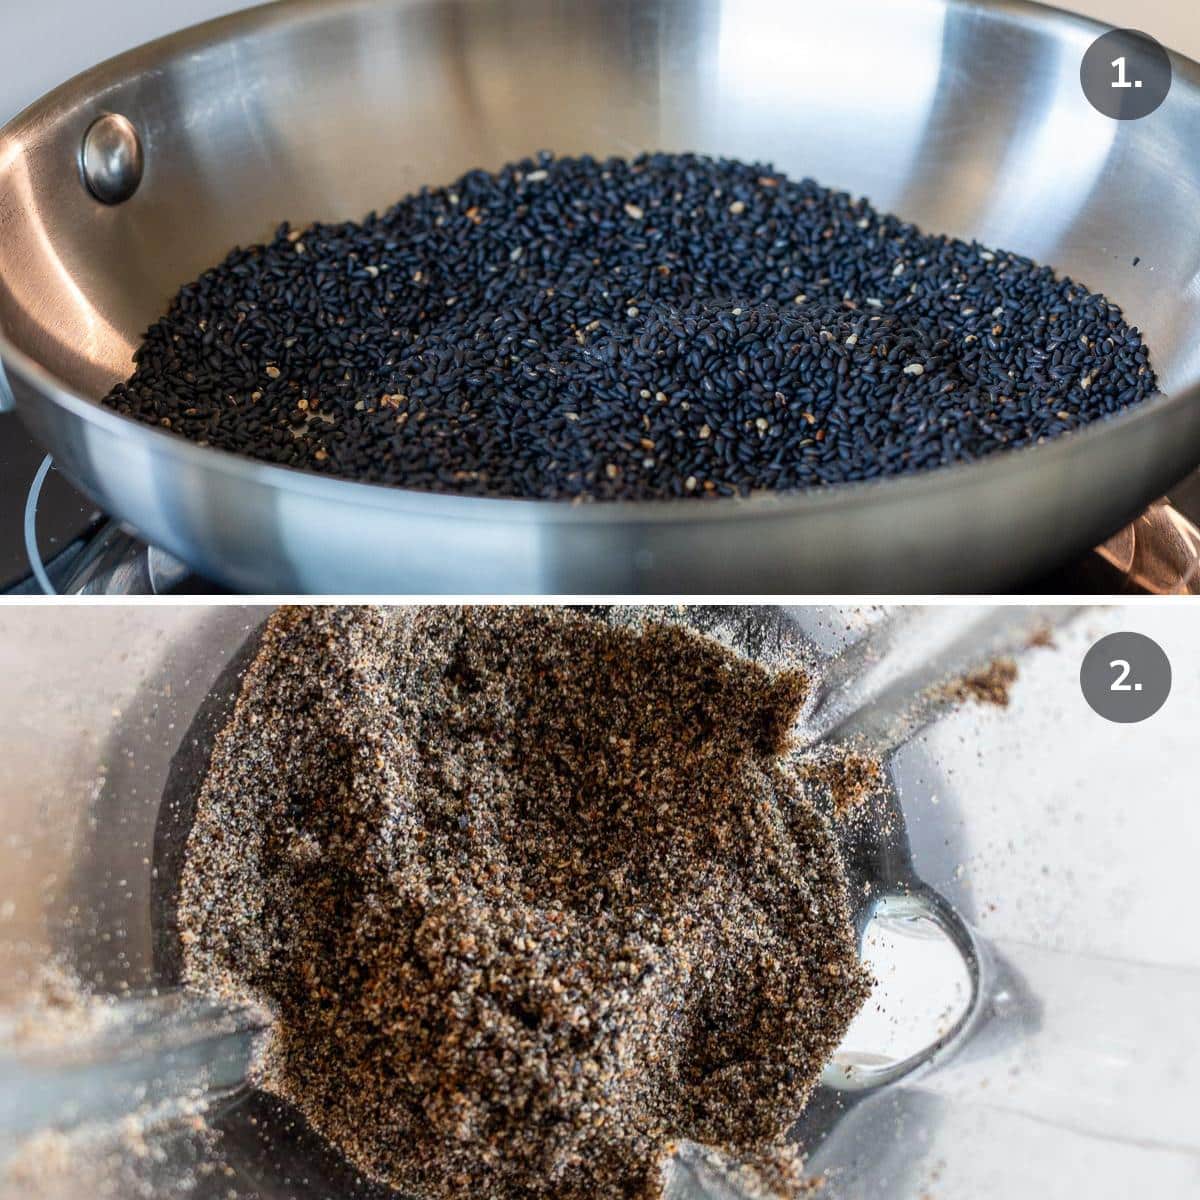 Roasting unhulled black sesame seeds in a pan and grinding them in a high powered blender.